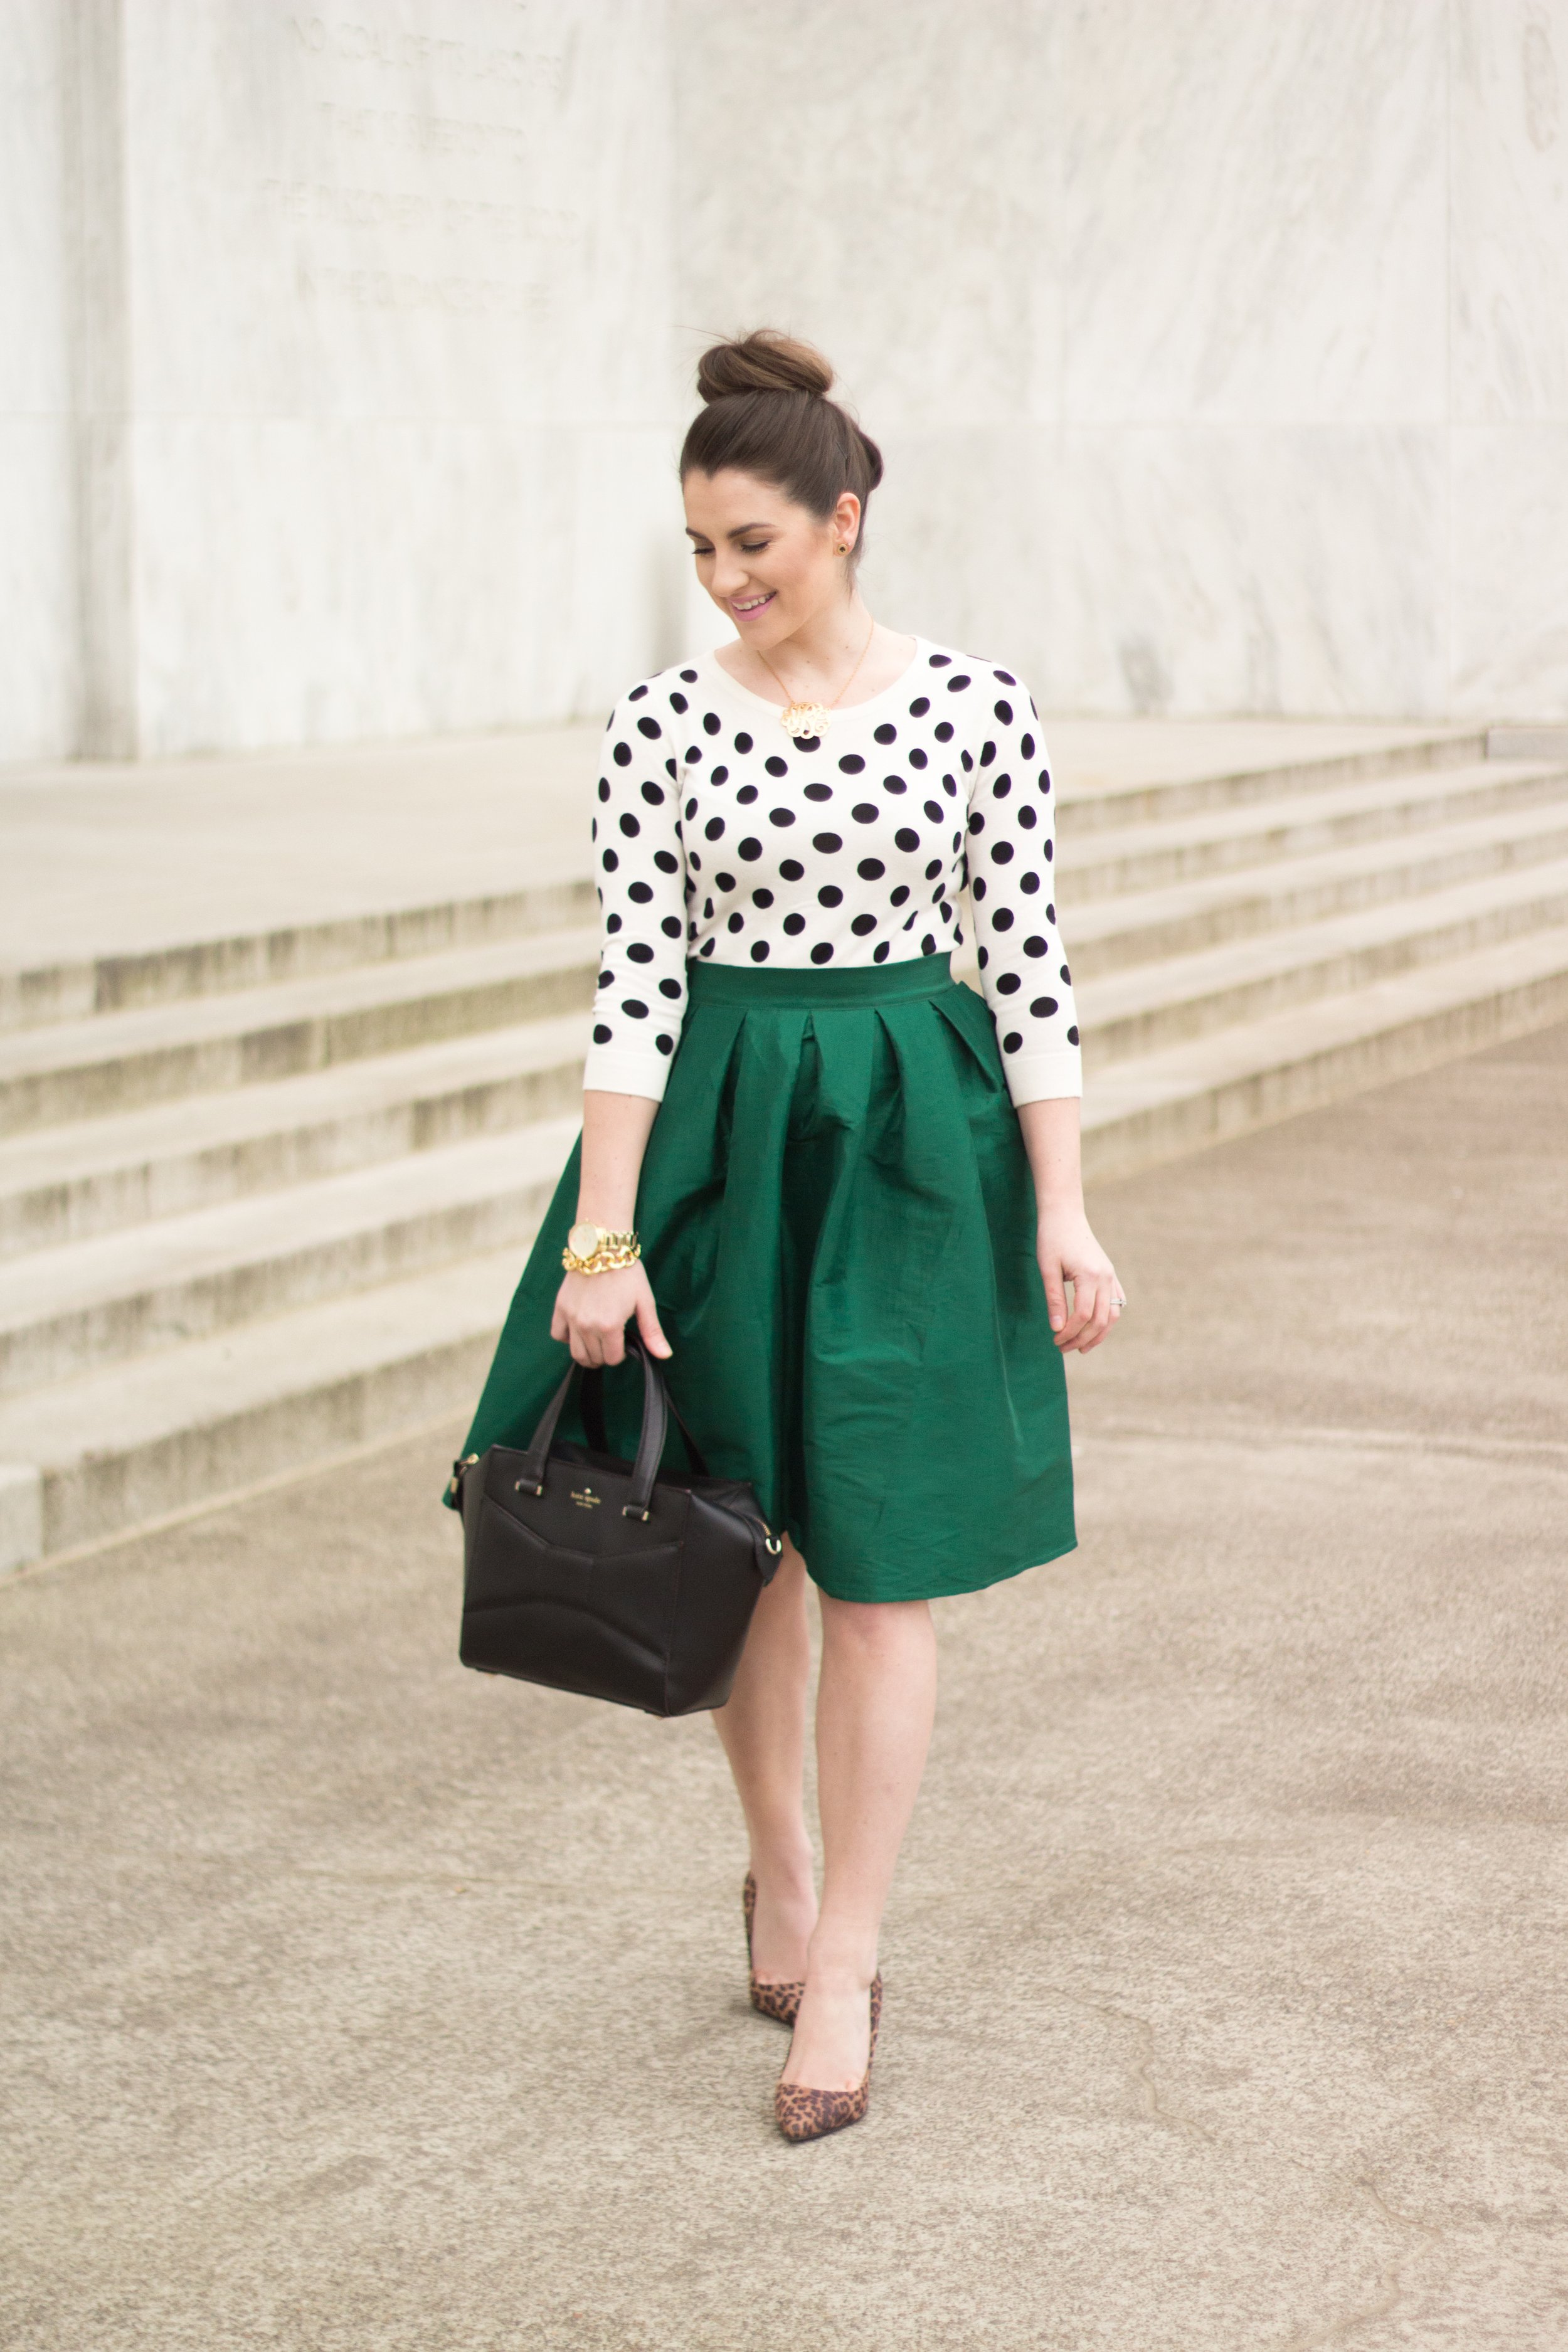 20 ways to dress Kate Spade inspired! - 20 Ways to wear Kate Spade Outfits by Portland fashion blogger Top Knots and Pearls